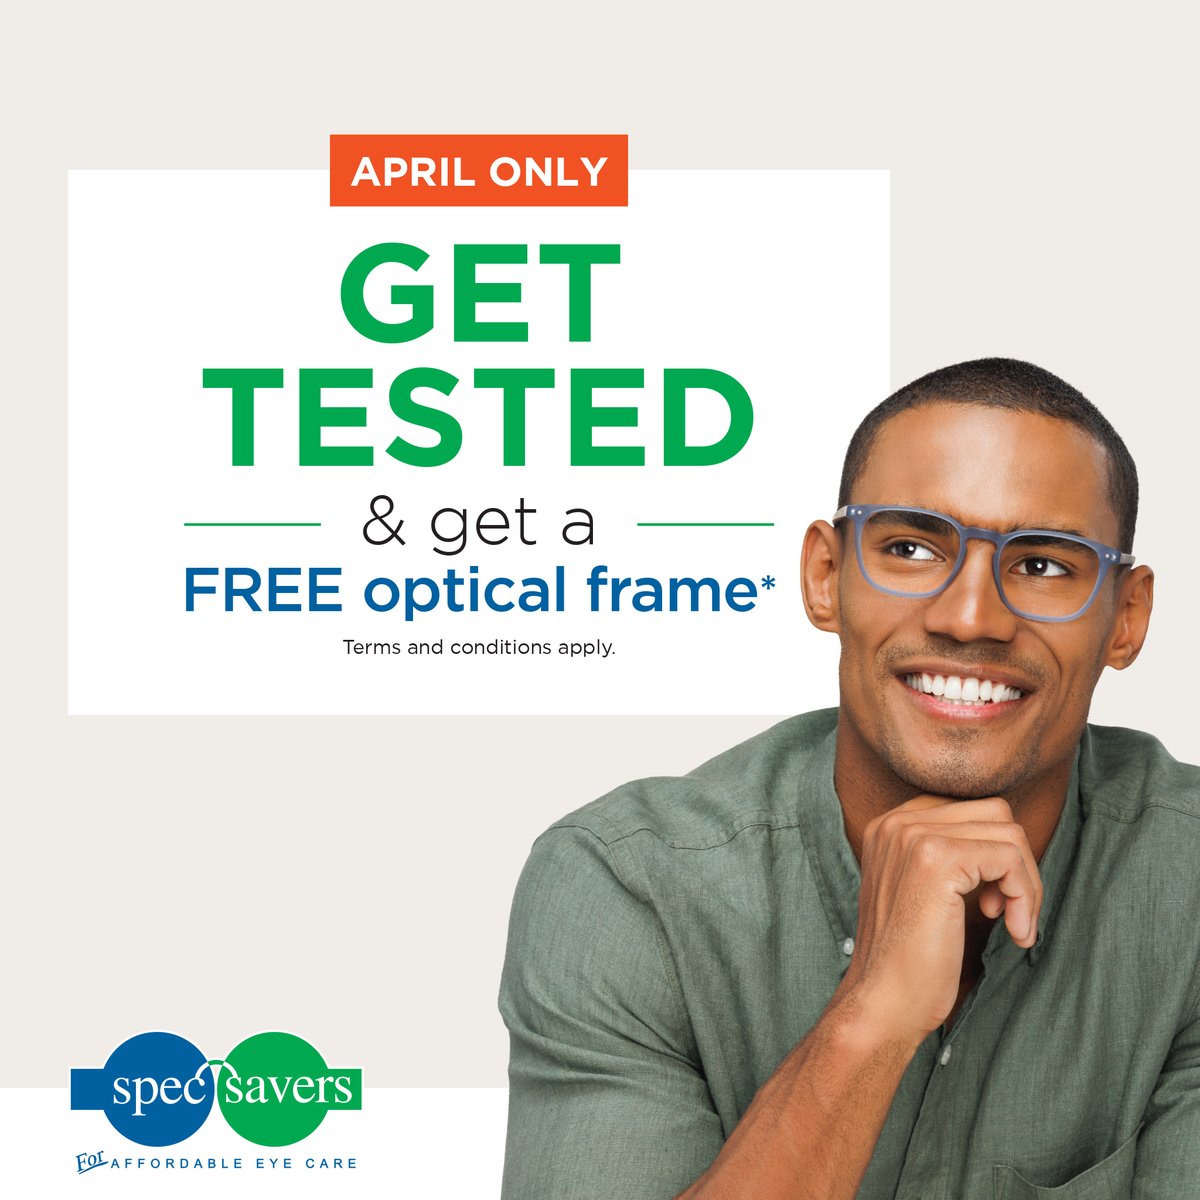 Get your eyes tested this April and get a FREE optical frame up to the value of R1000 📷📷 Book your eye examination now at your nearest Spec-Savers store to seize this fantastic offer! T’s&C’s apply. 📷📷 Exclusive to @Specsavers #specsavers #aprilpromo #eyetest #gettested